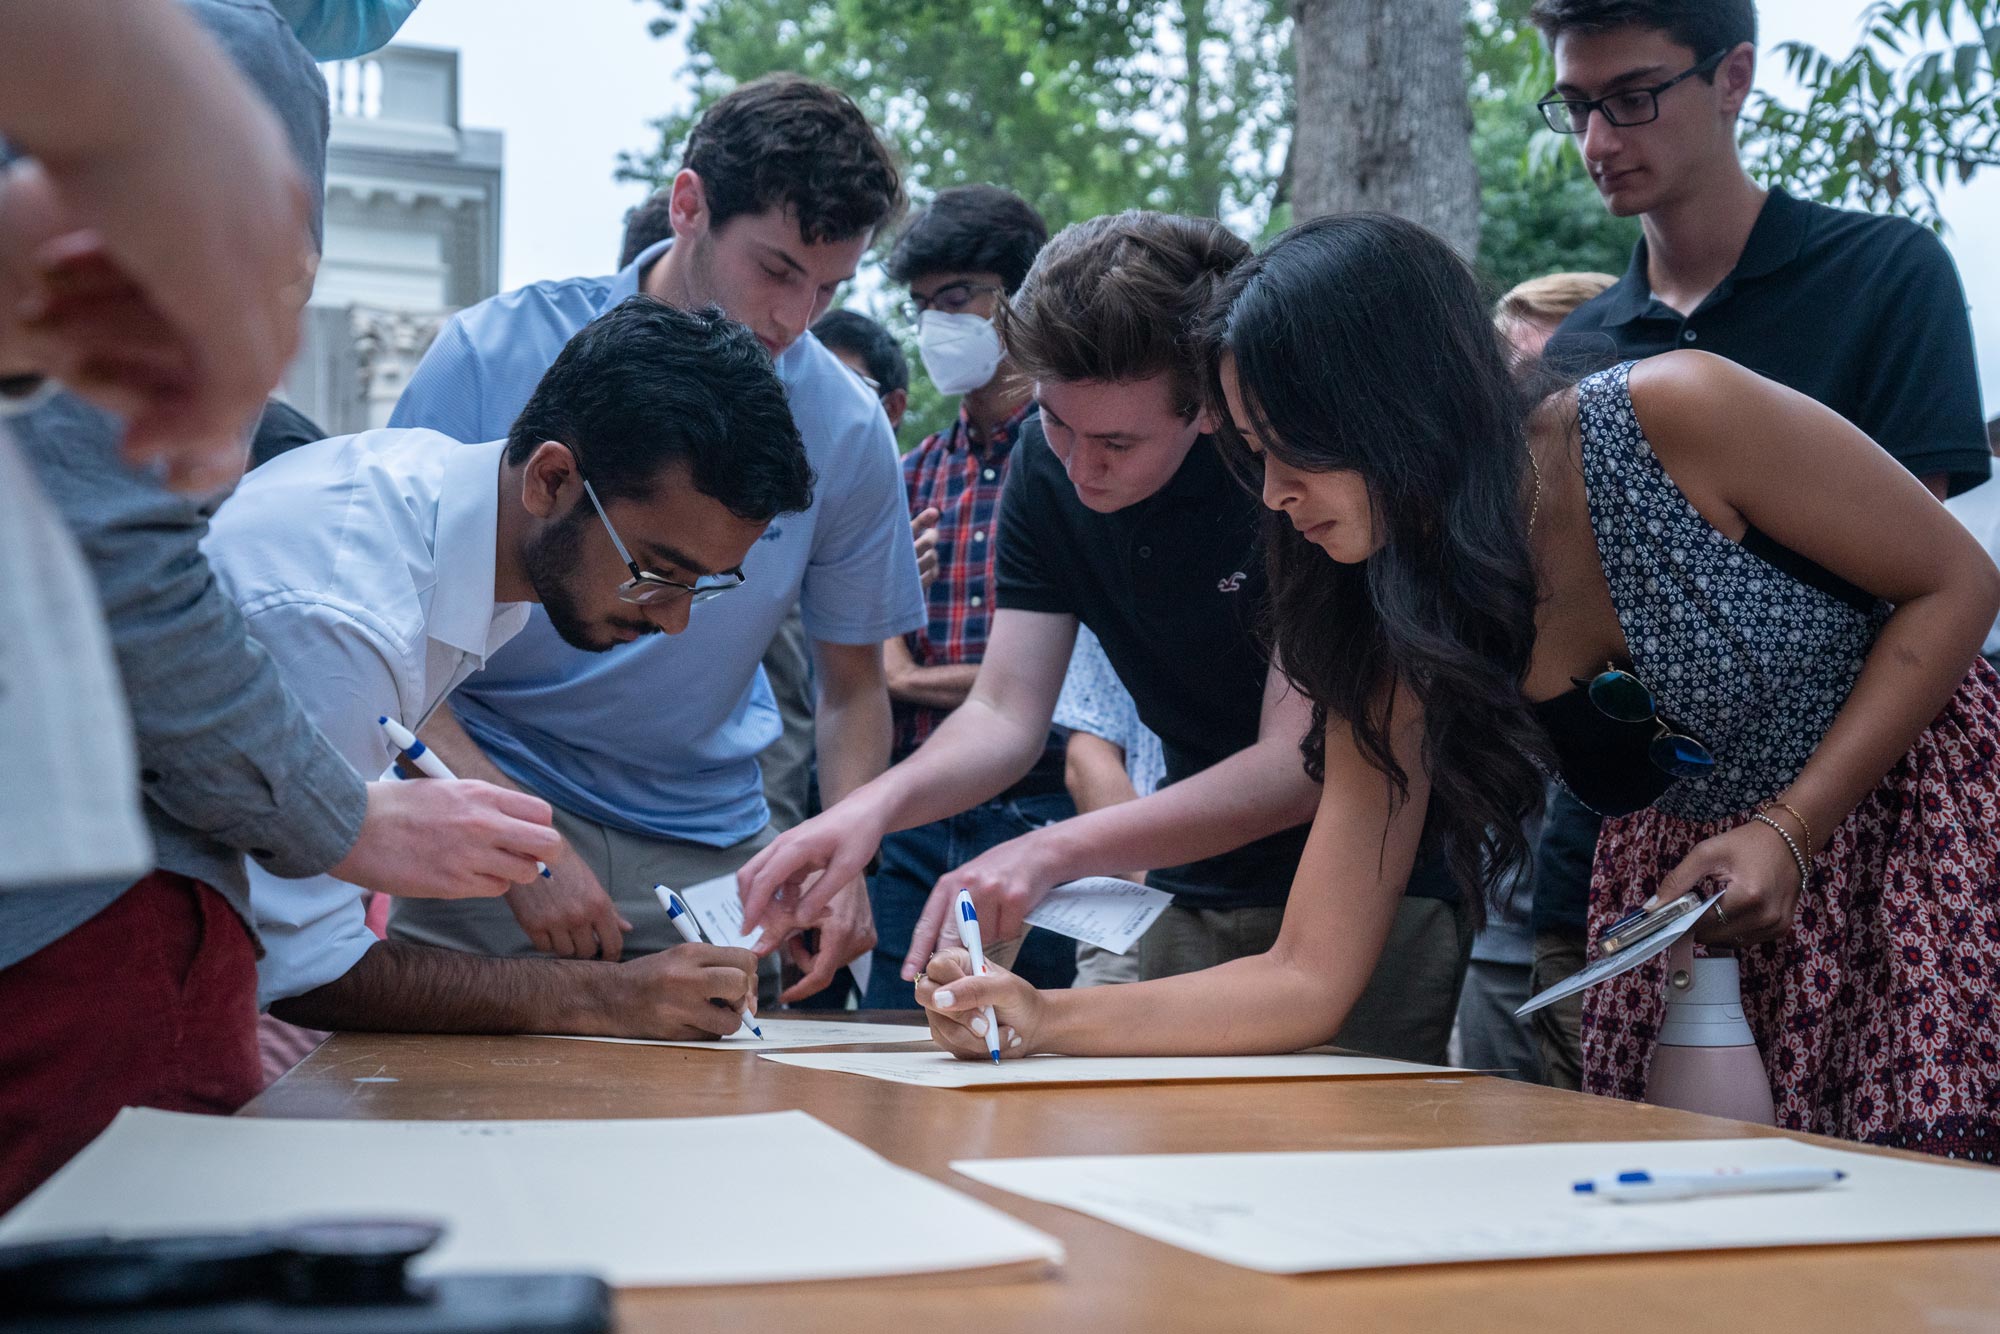 University of Virginia students crowded around a table, signing their names on sheets of paper